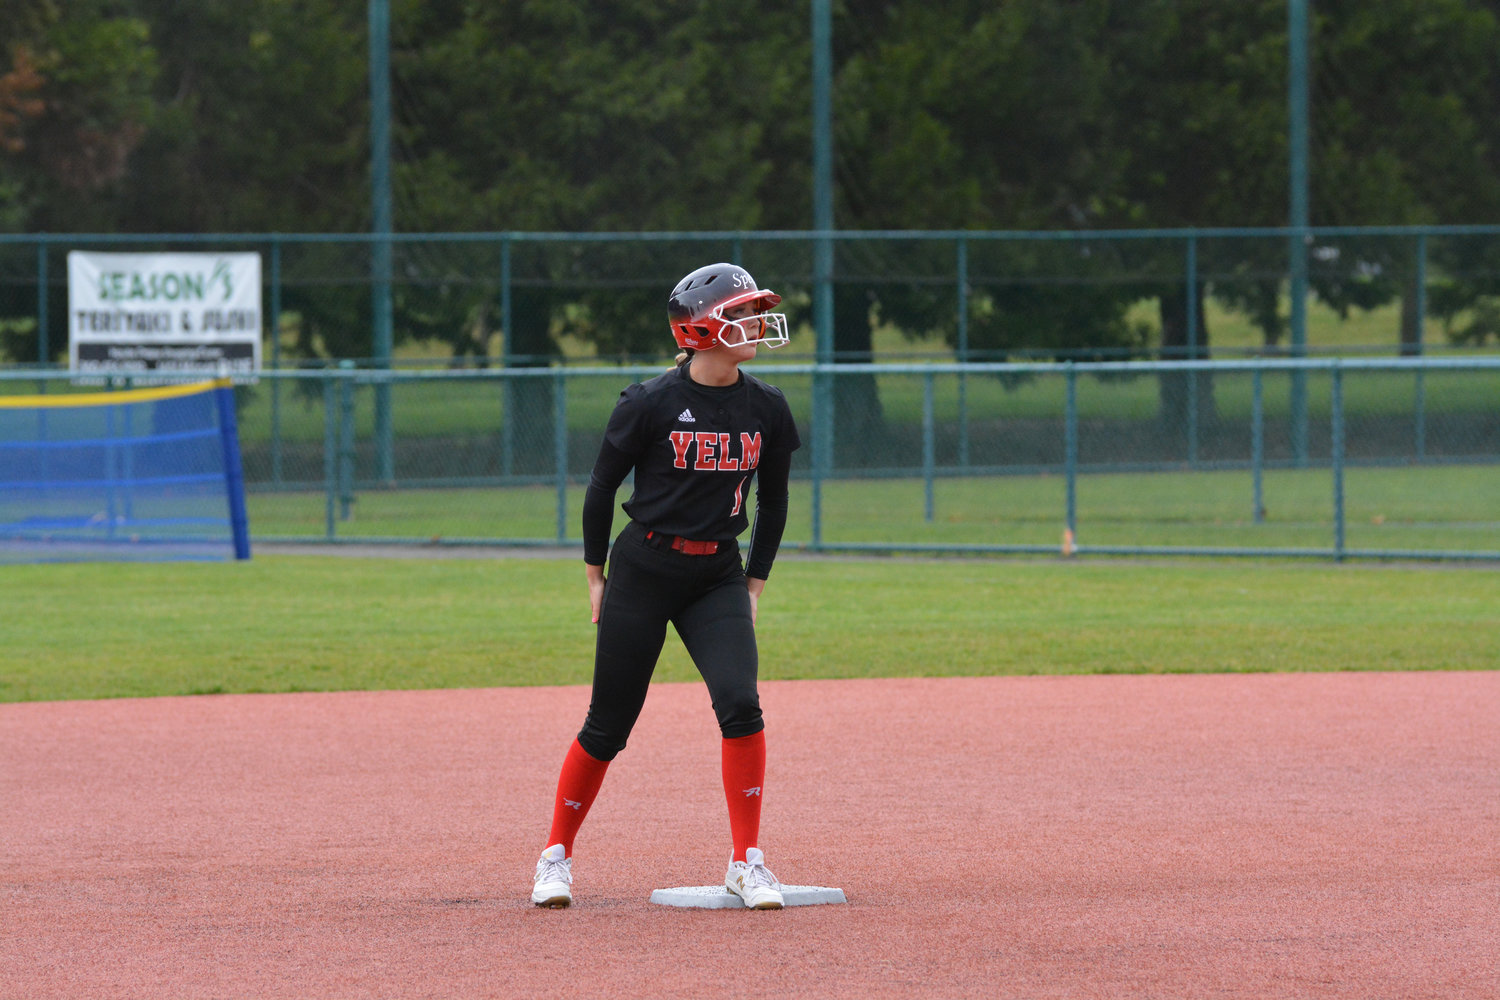 Infielder Molly Embrey had a strong performance offensively against Cascade, which included two doubles and a walk.